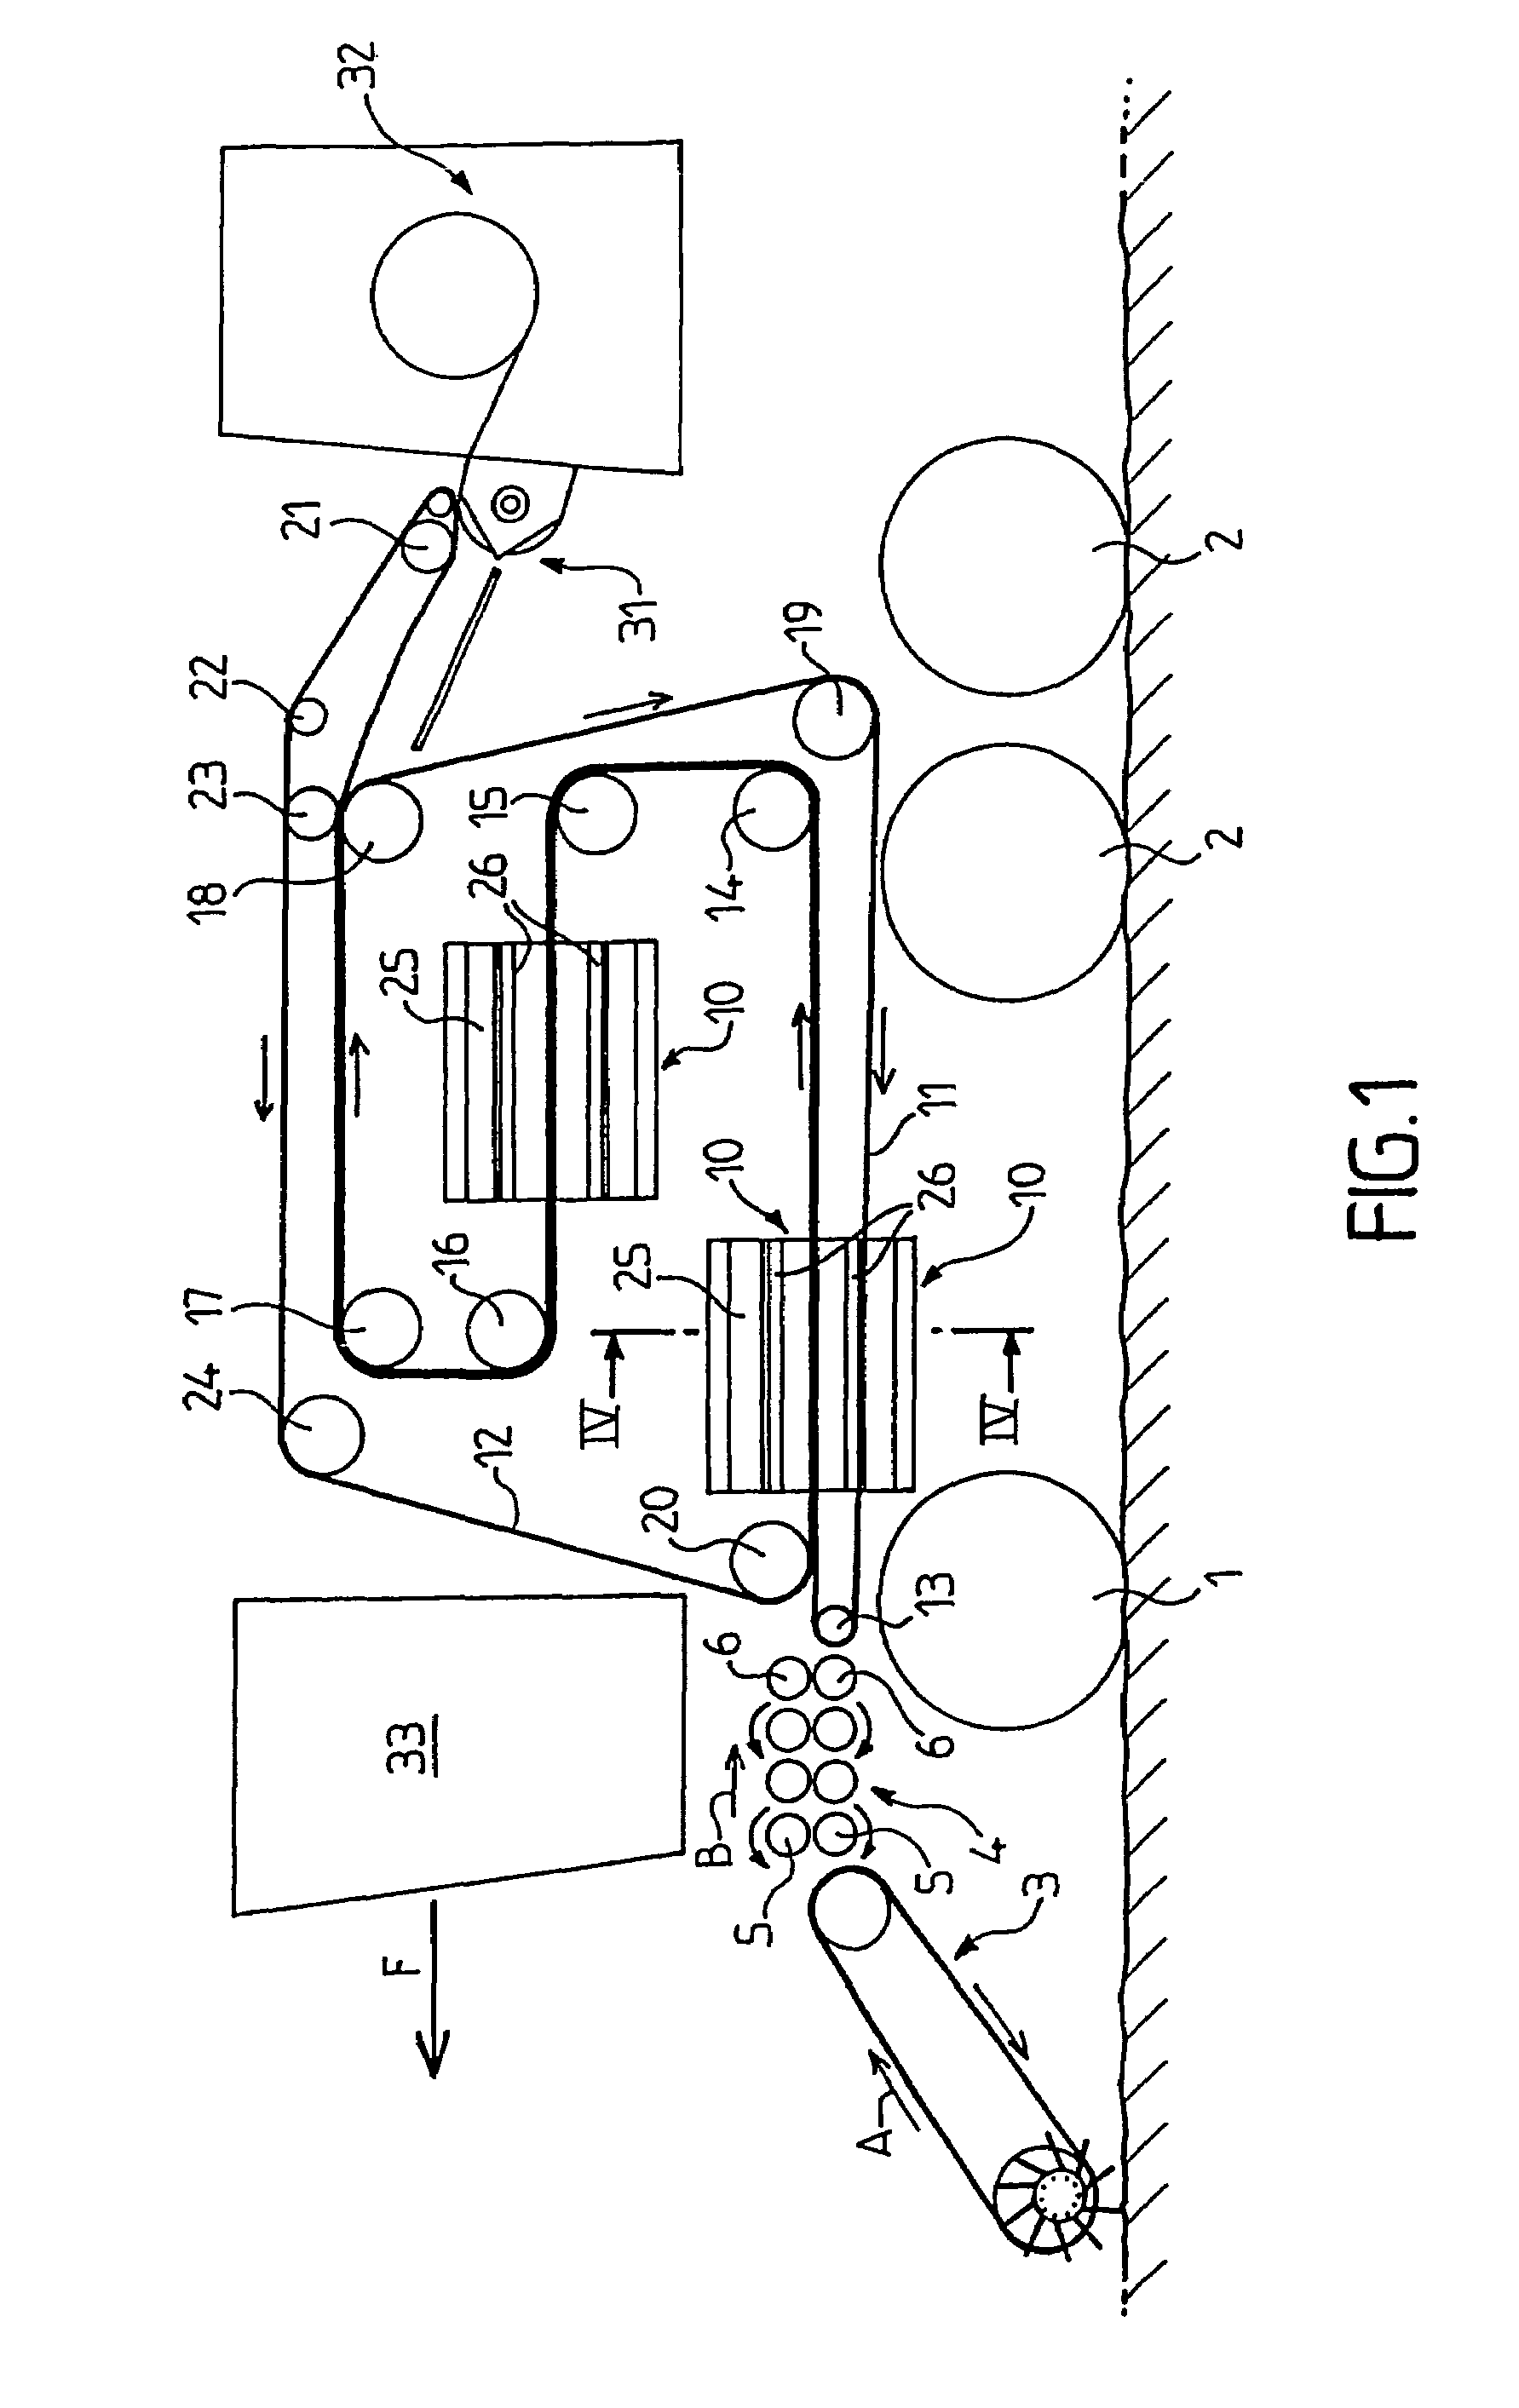 Method and machine for packing fibrous plants into balls especially common flax, hemp plant and sisal